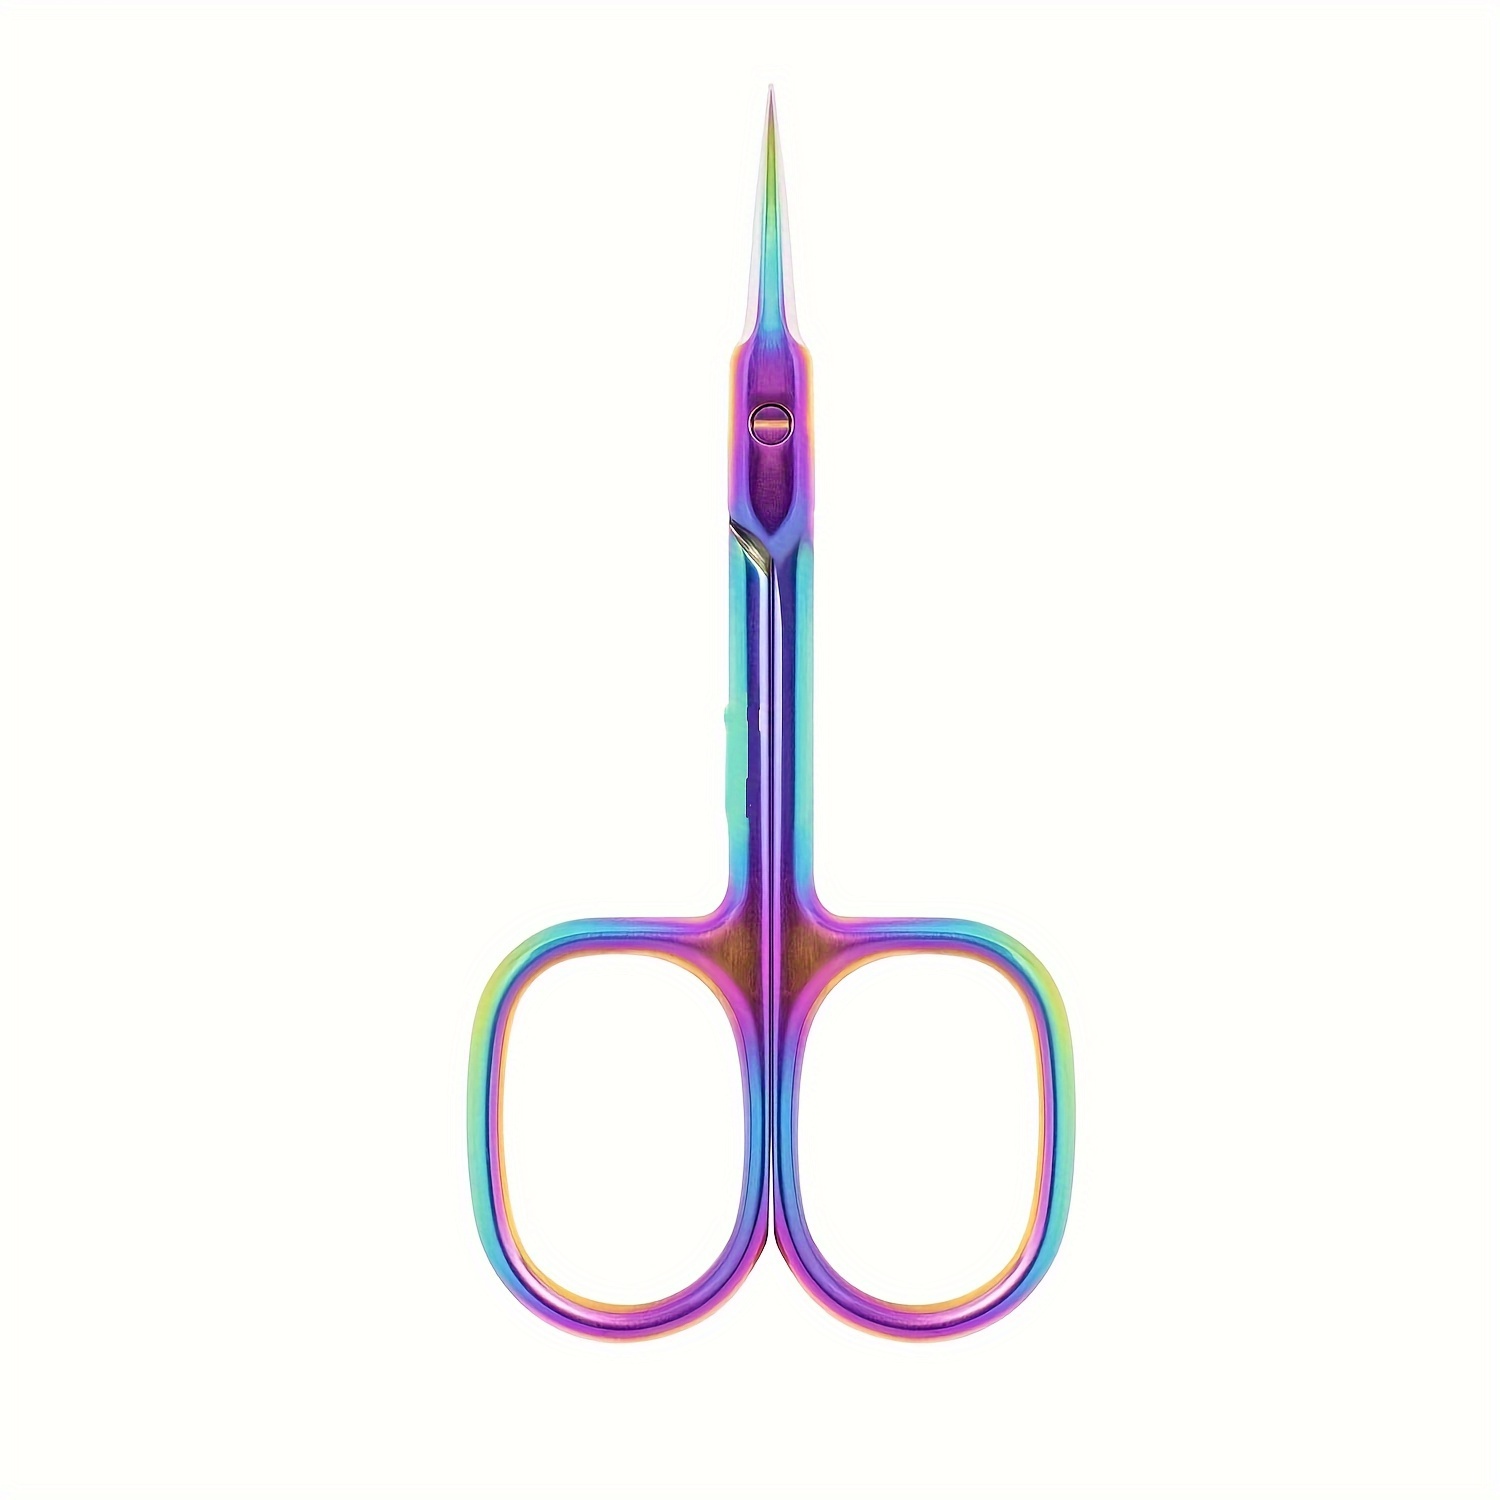 

Stainless Steel Cuticle Scissors, Curved Blade Nail & Eyebrow Trimming, Multi-purpose Small Manicure Scissors, For Nail, Eyebrow, Eyelash, Nose Hair, Tool